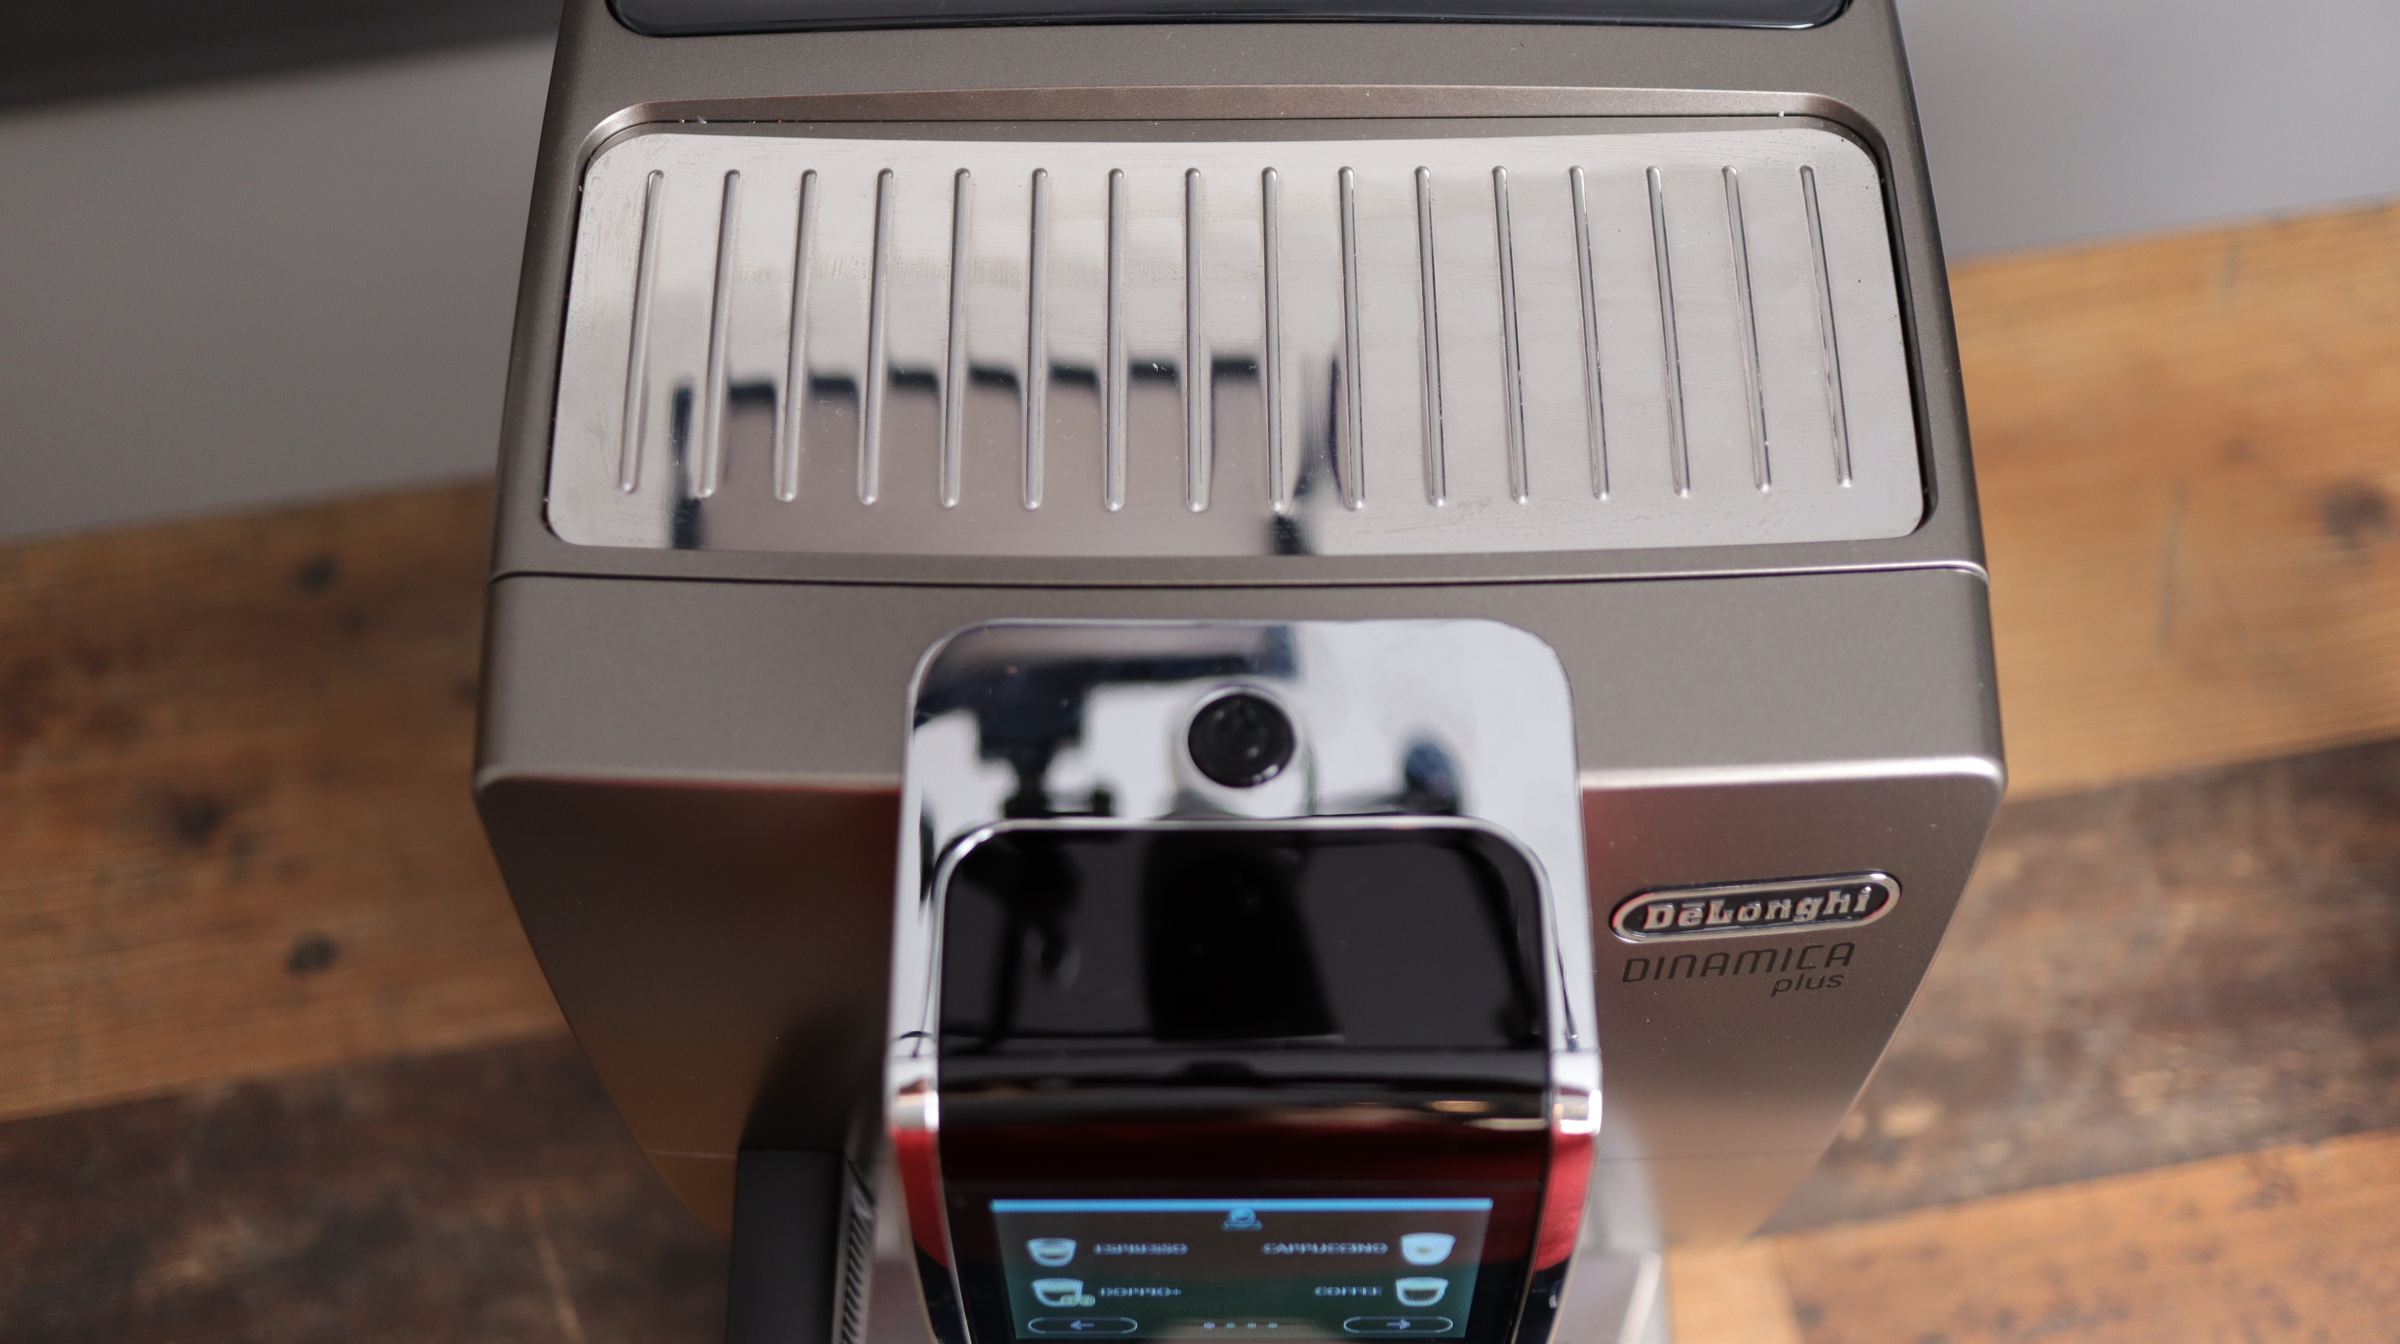 Delonghi Dinamica Plus as shown from above with cup warming tray and power on button.